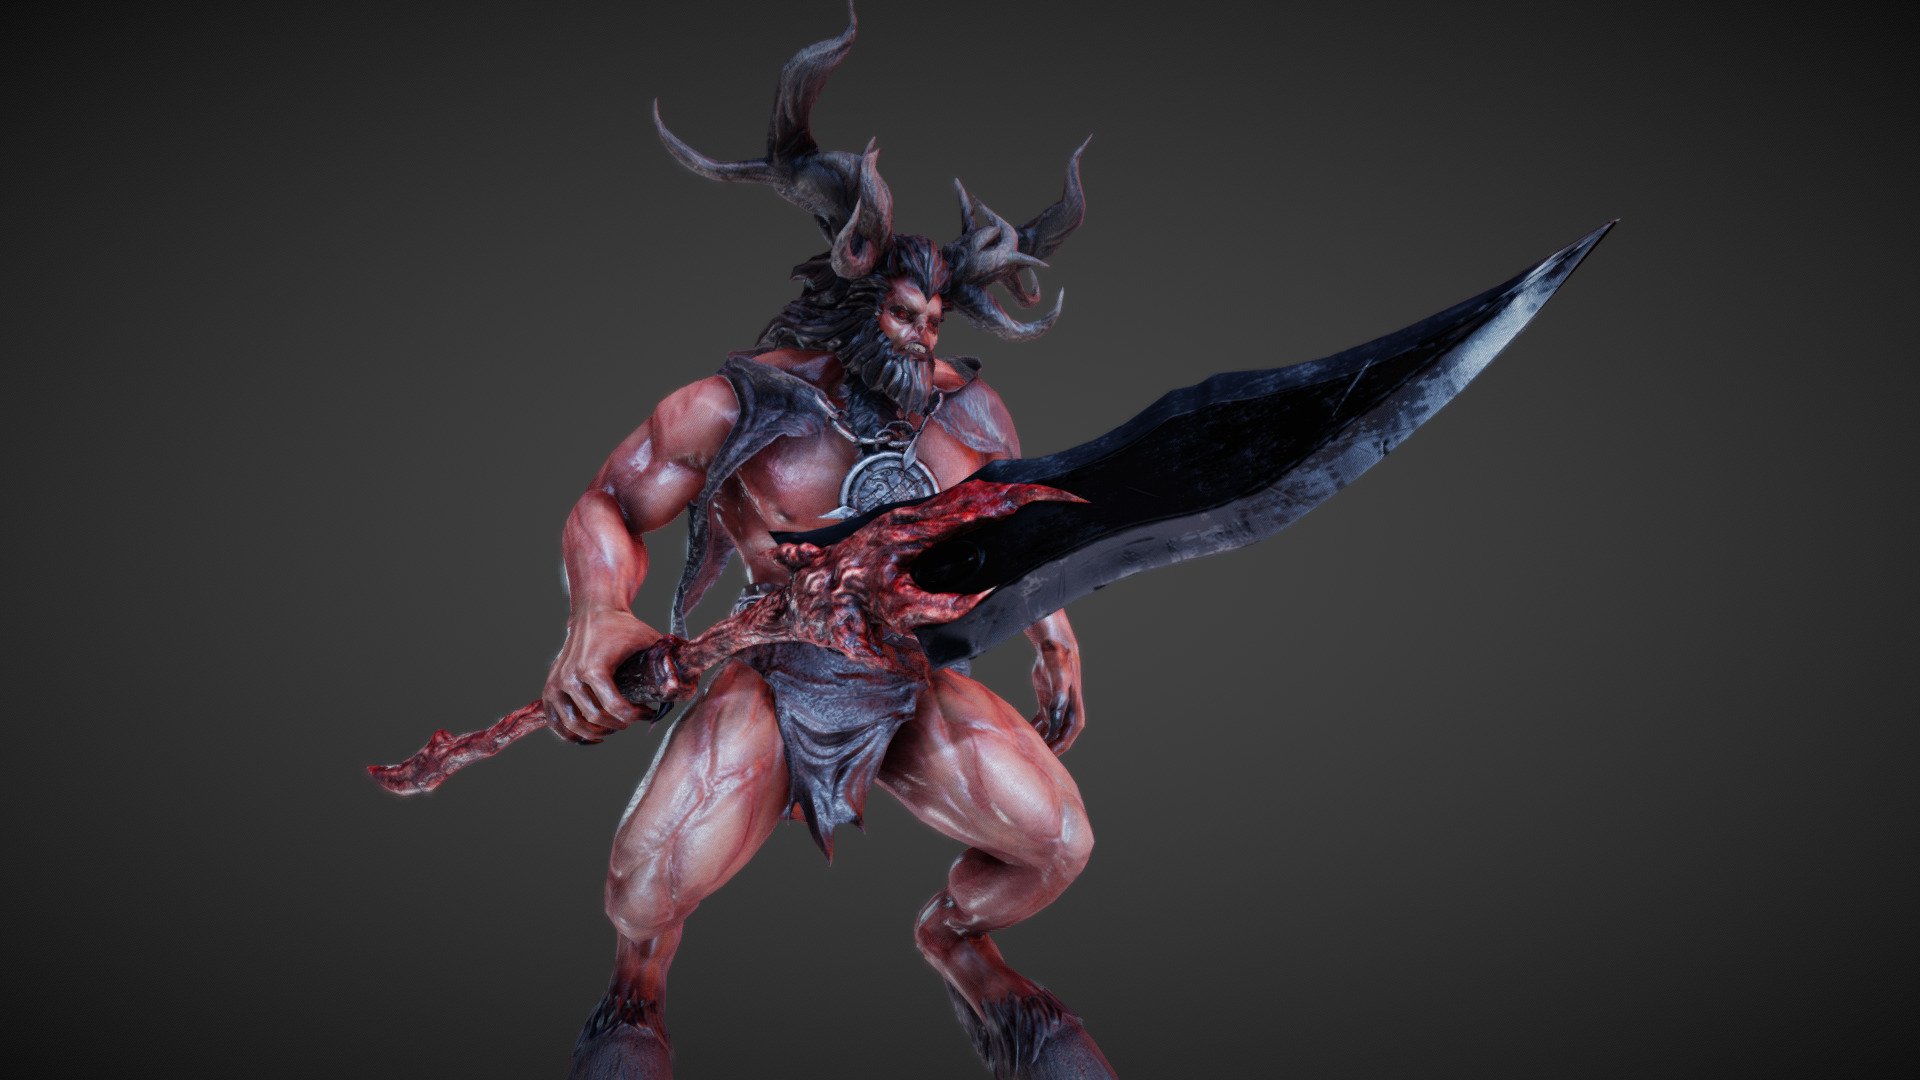 Video Game character
Rigged / Animated
2 x 2048 Set

I put all the horns superimposed, to see differents versions, look at the youtube video
https://www.youtube.com/watch?v=UjQgIylFb9E

https://www.artstation.com/backdude

28,611 tri :
Double Sided Cloth and chains for unity
Modulable (Differents horns, Hair, and cape movable)
25,478 without double sided - Demon Medium Animations - 3D model by BackDude (@adrien.esch) 3d model